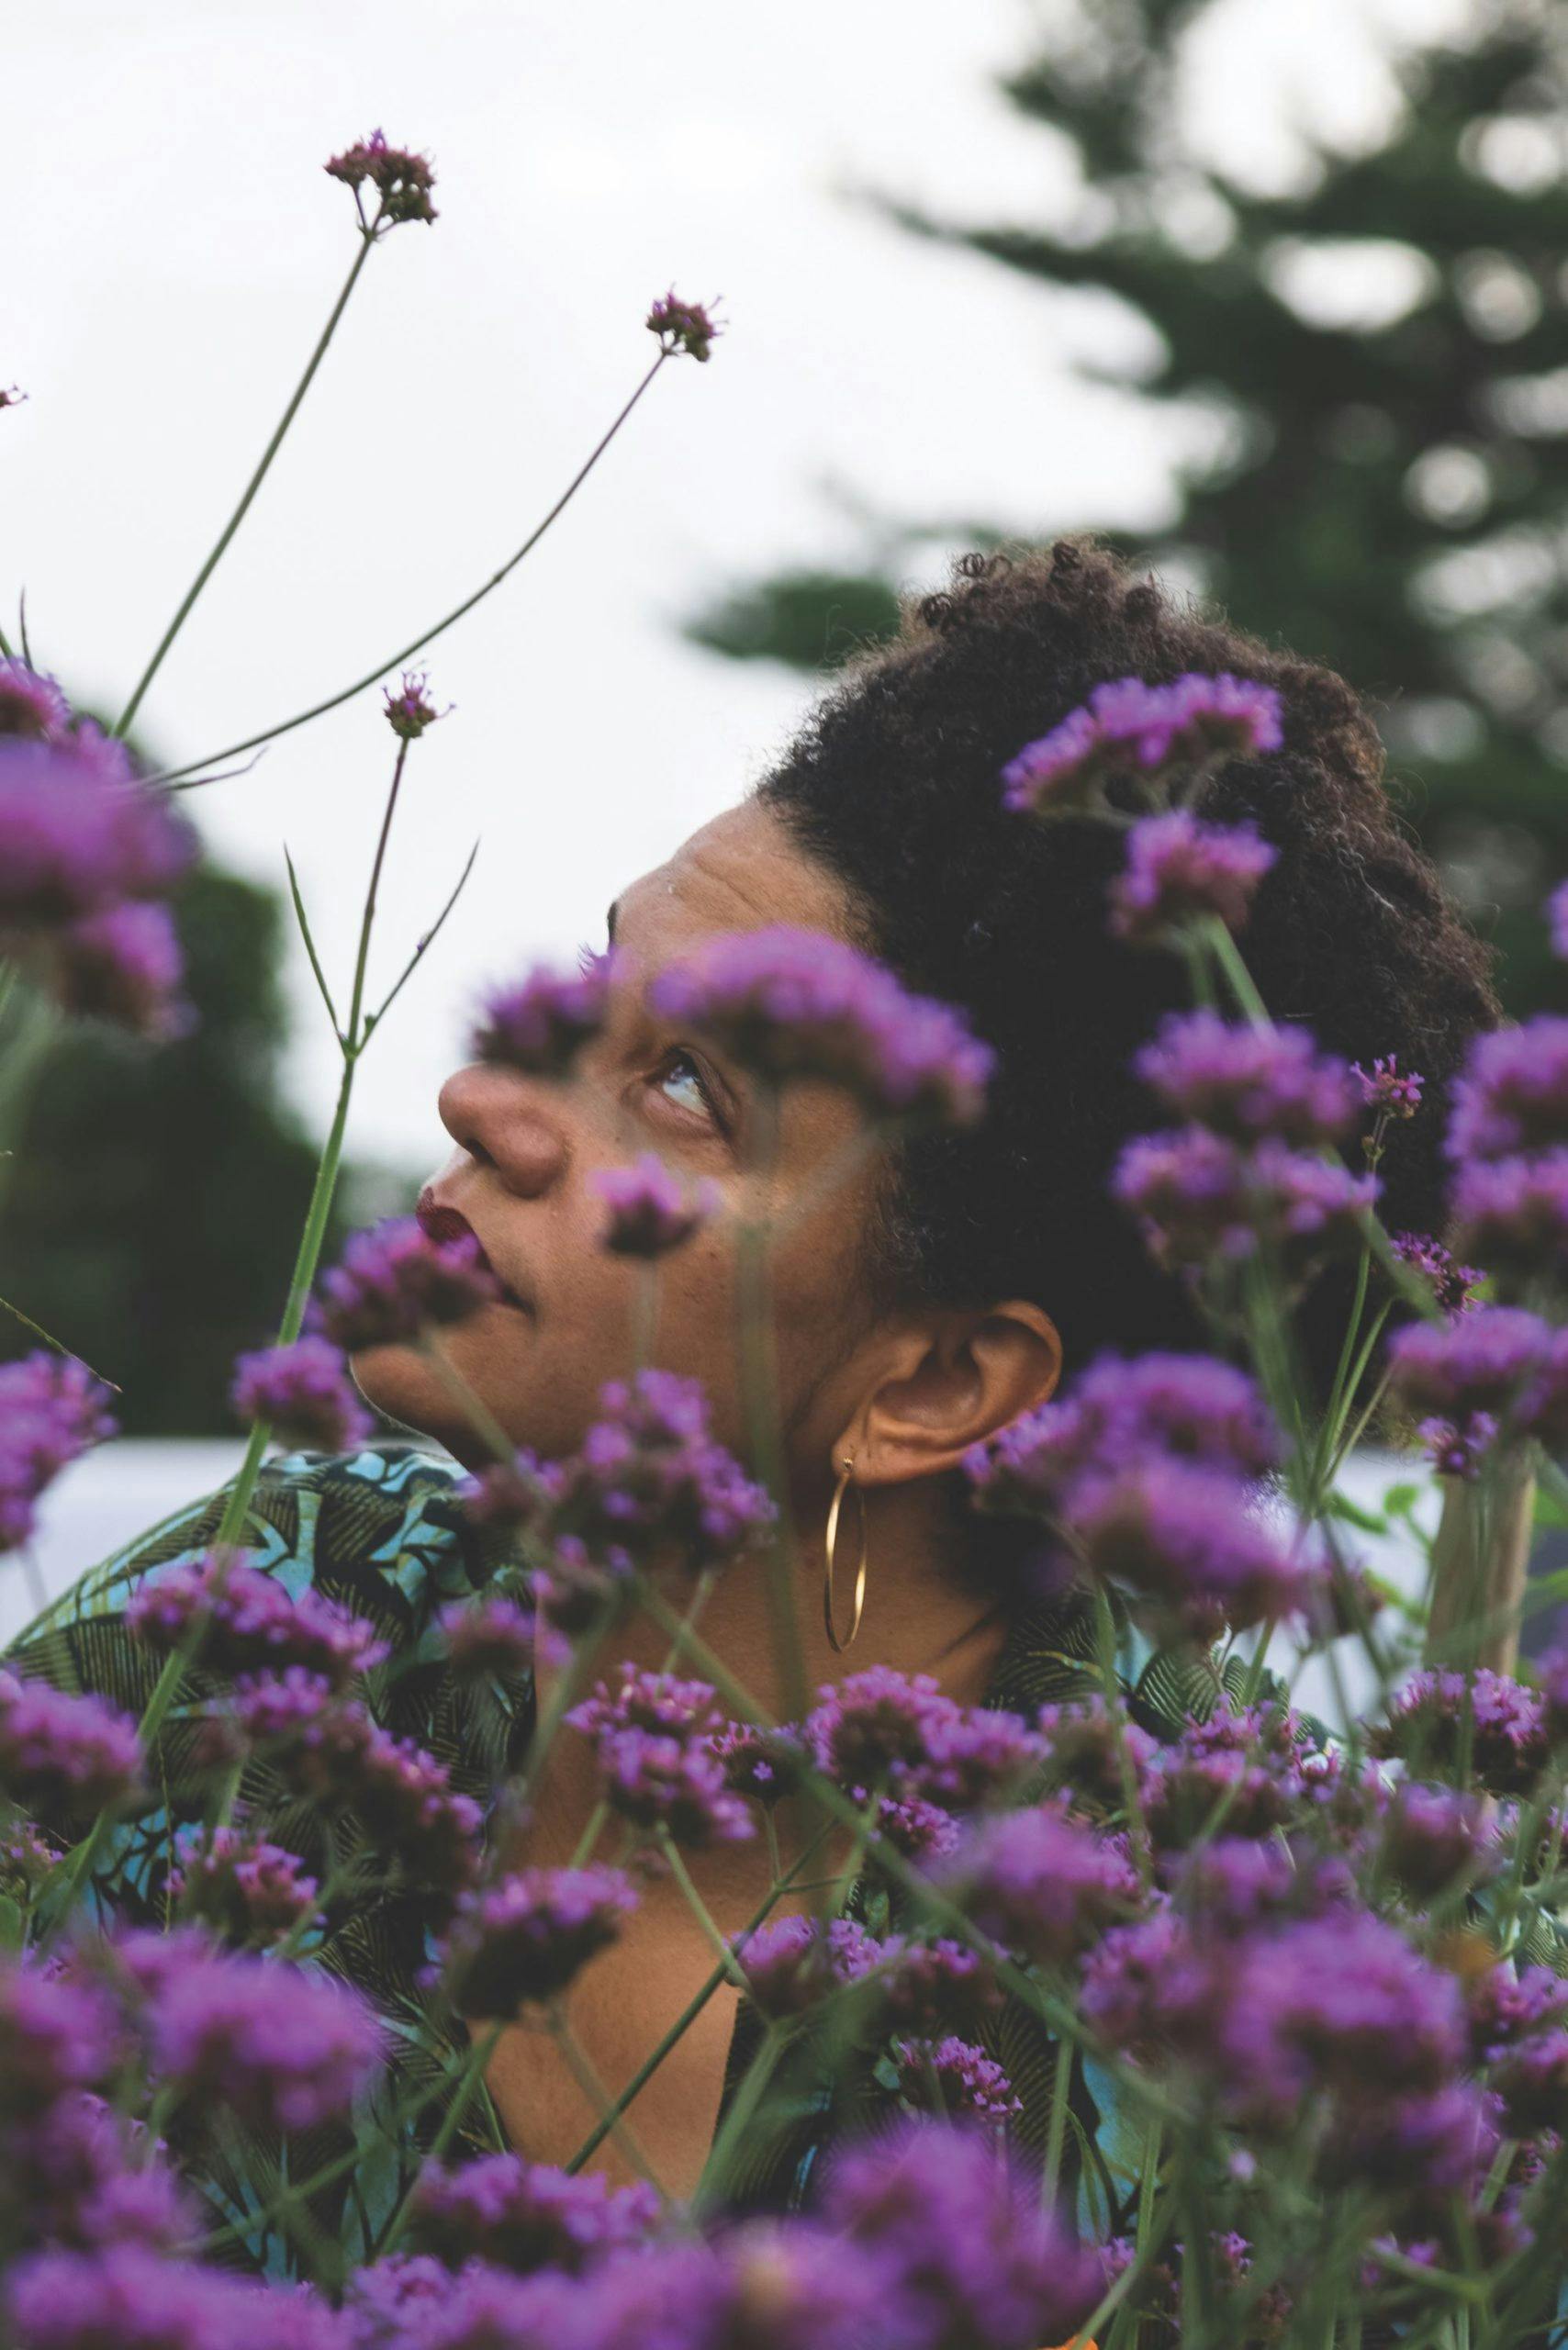 Jessica Roseman is photographed behind blossoming purple flowers.